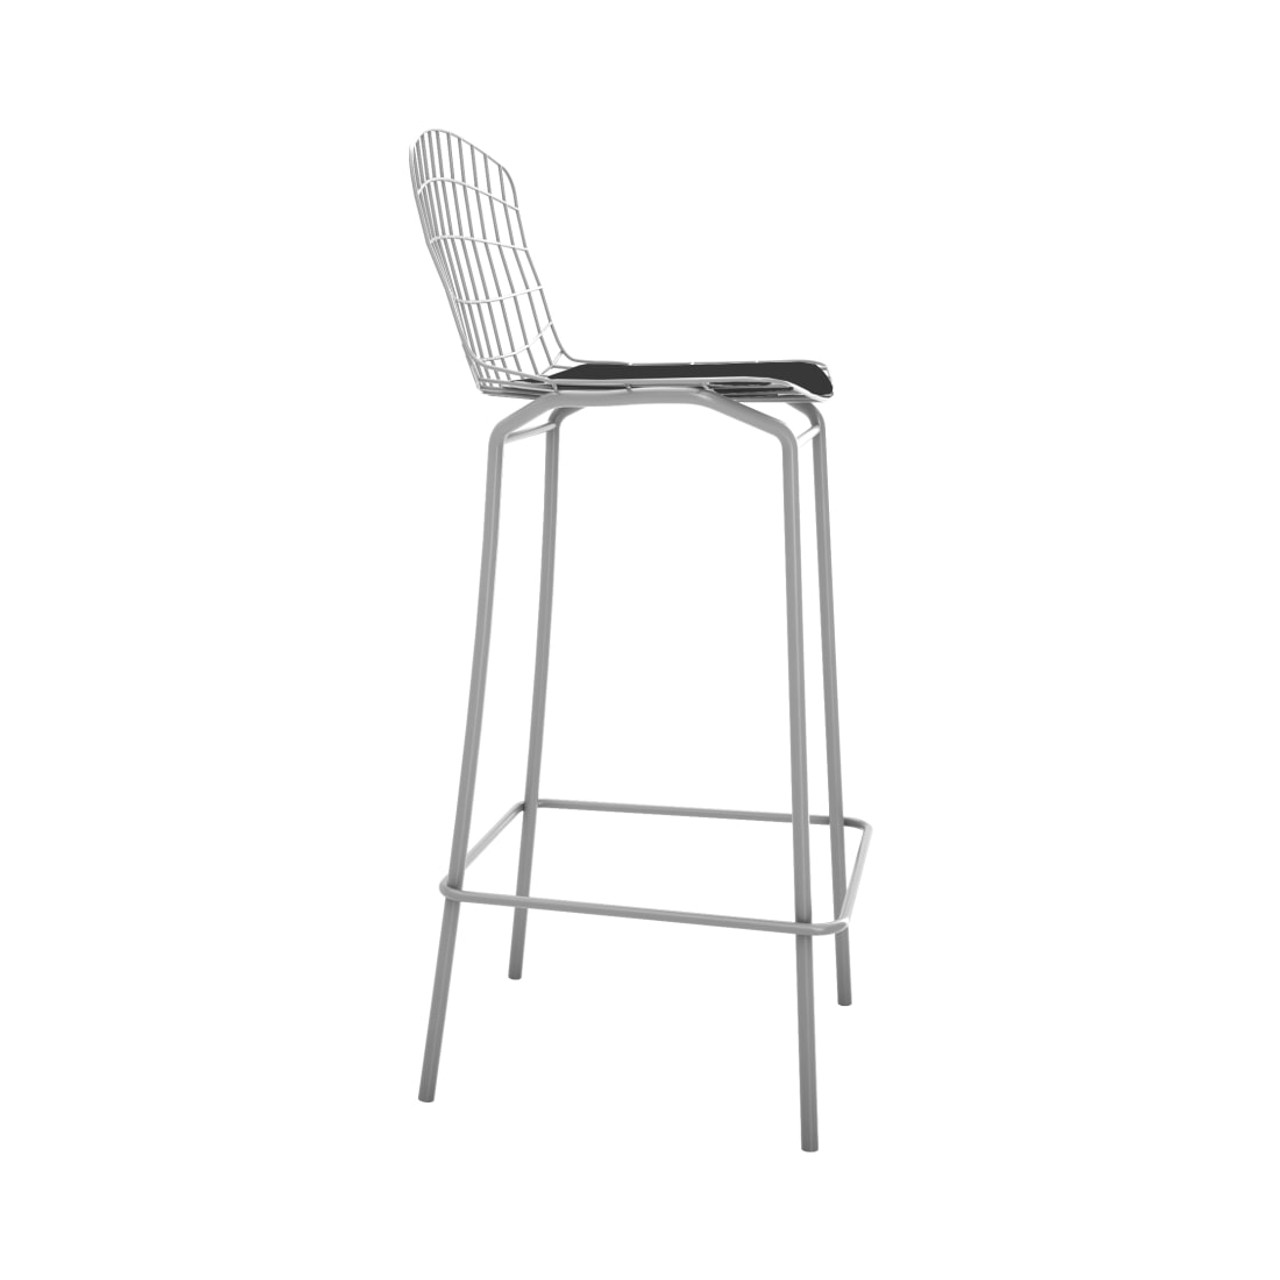 Madeline Barstool in Charcoal Gray and Black (Set of 2)